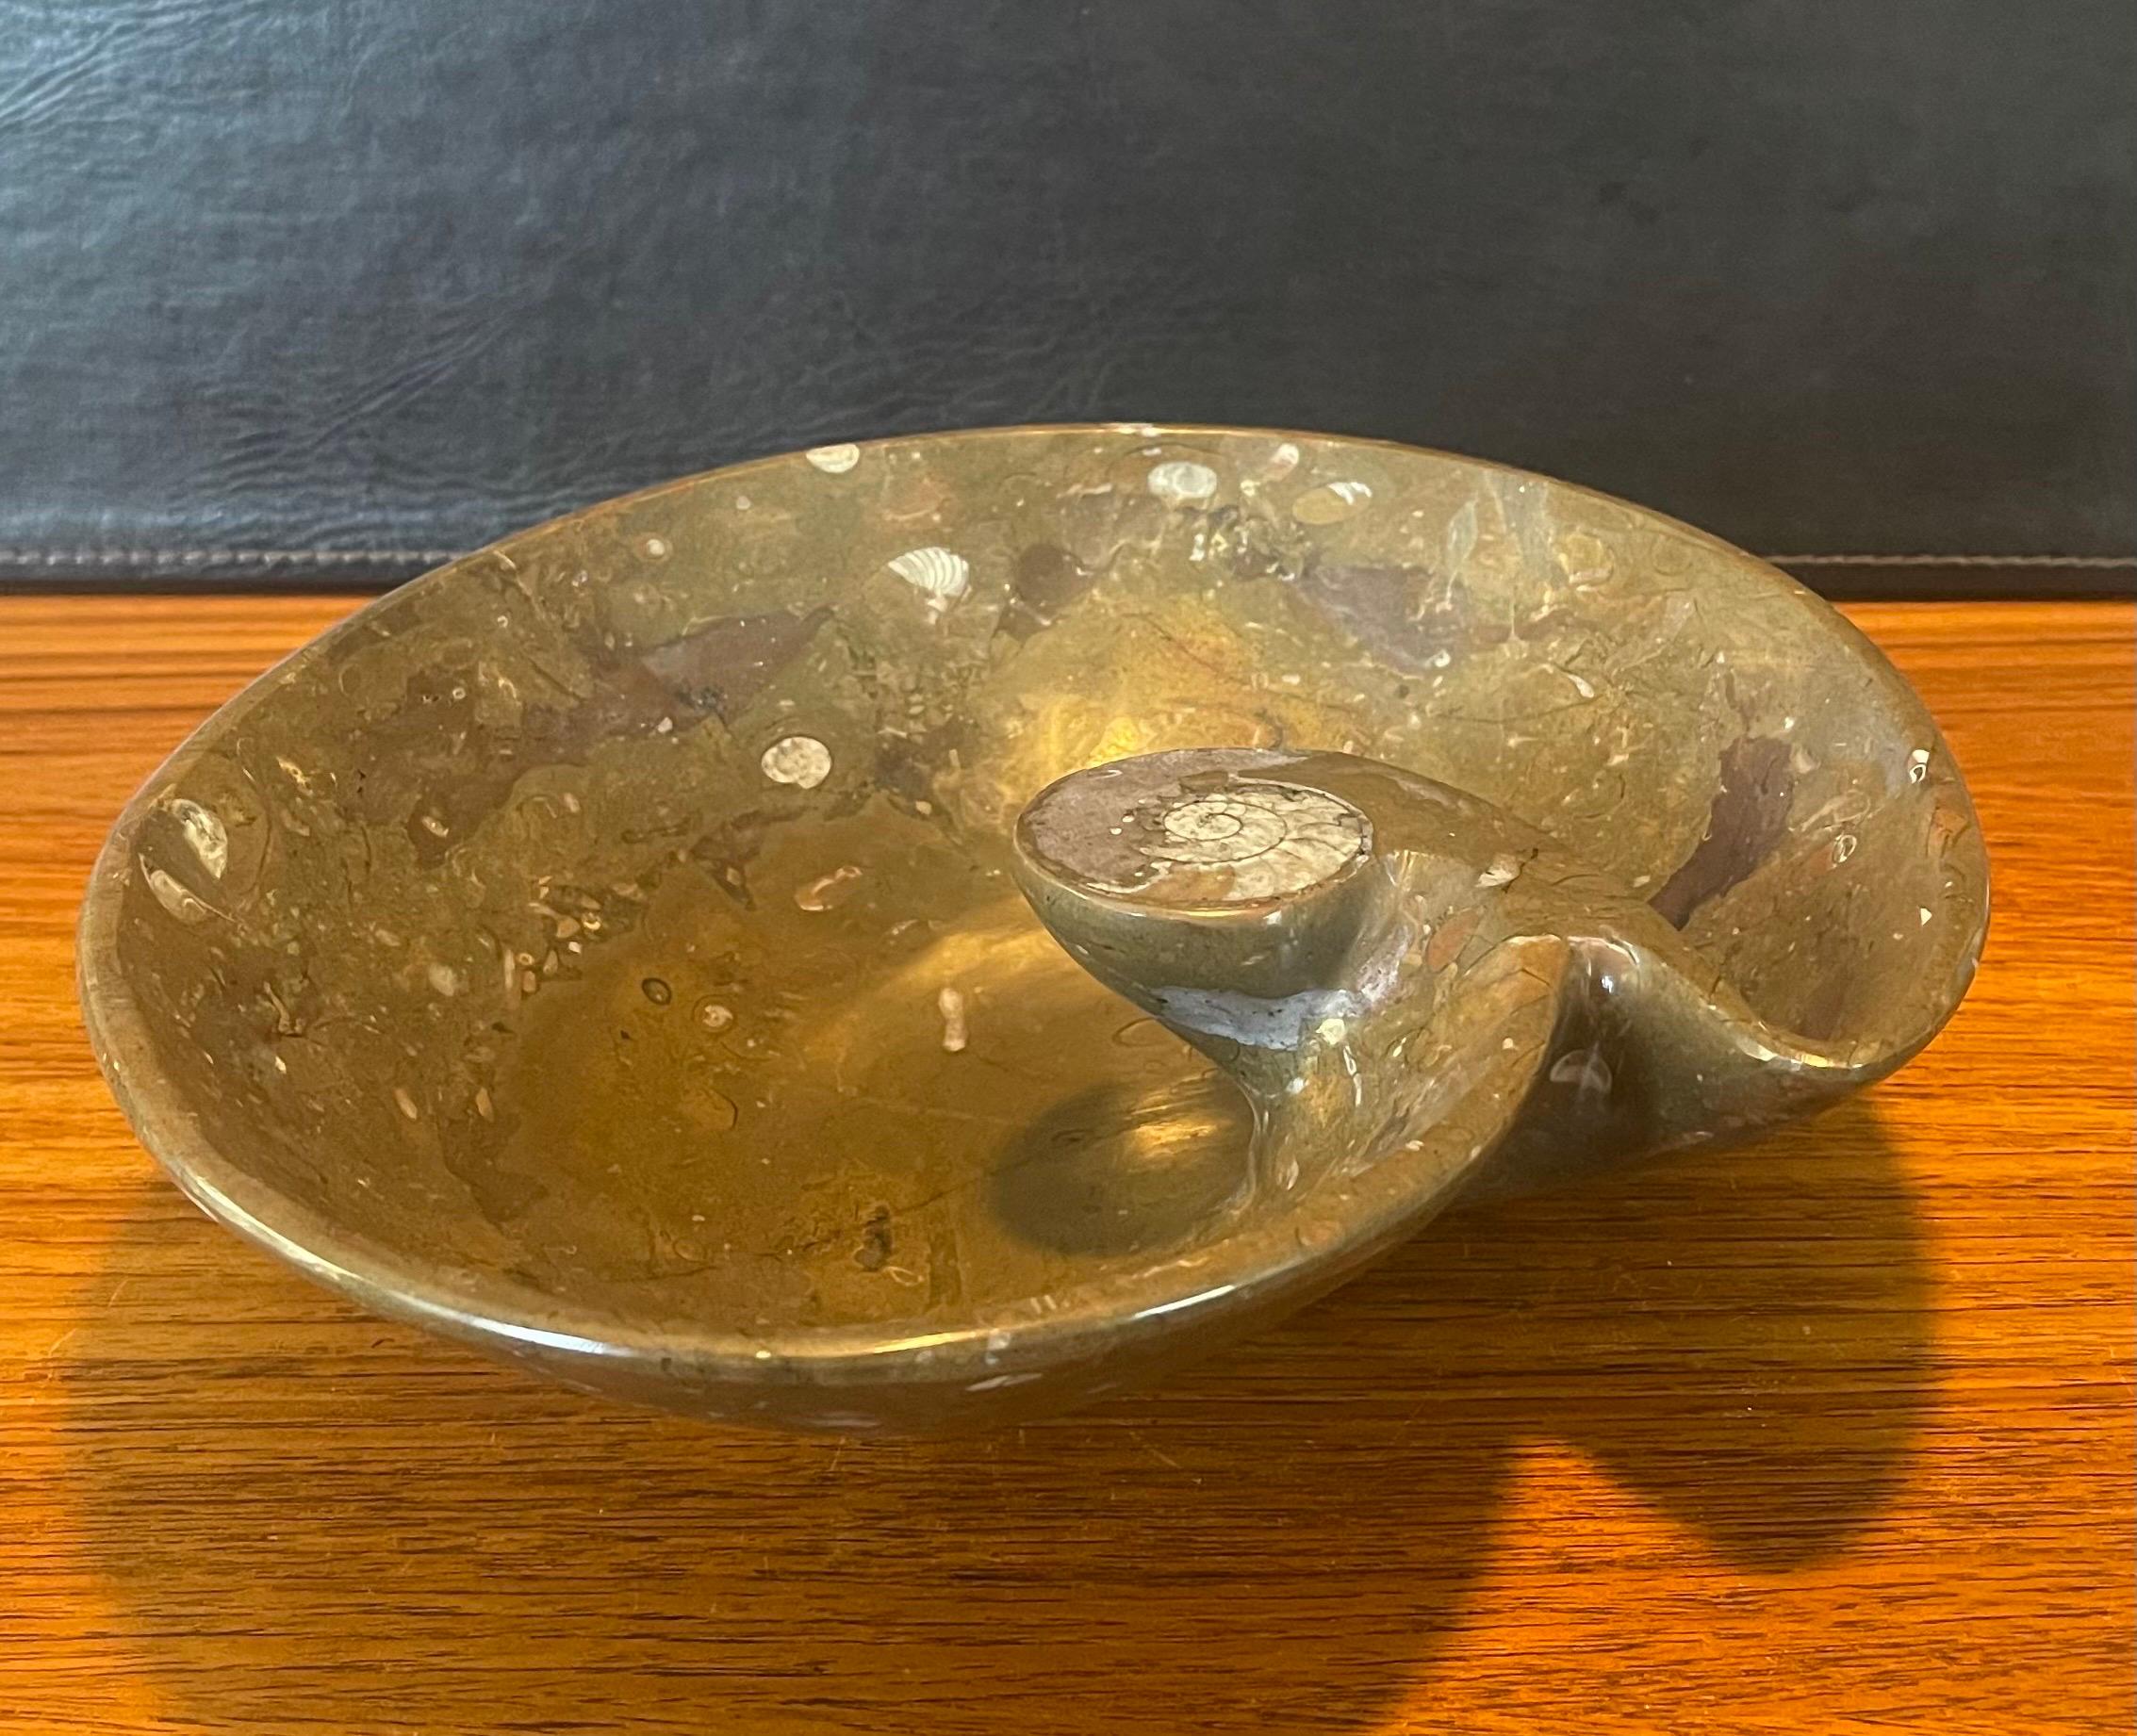 Mid-century Italian polished marble fruit bowl / centerpiece, circa 1980s. The bowl is in very good vintage condition and measures 11.5